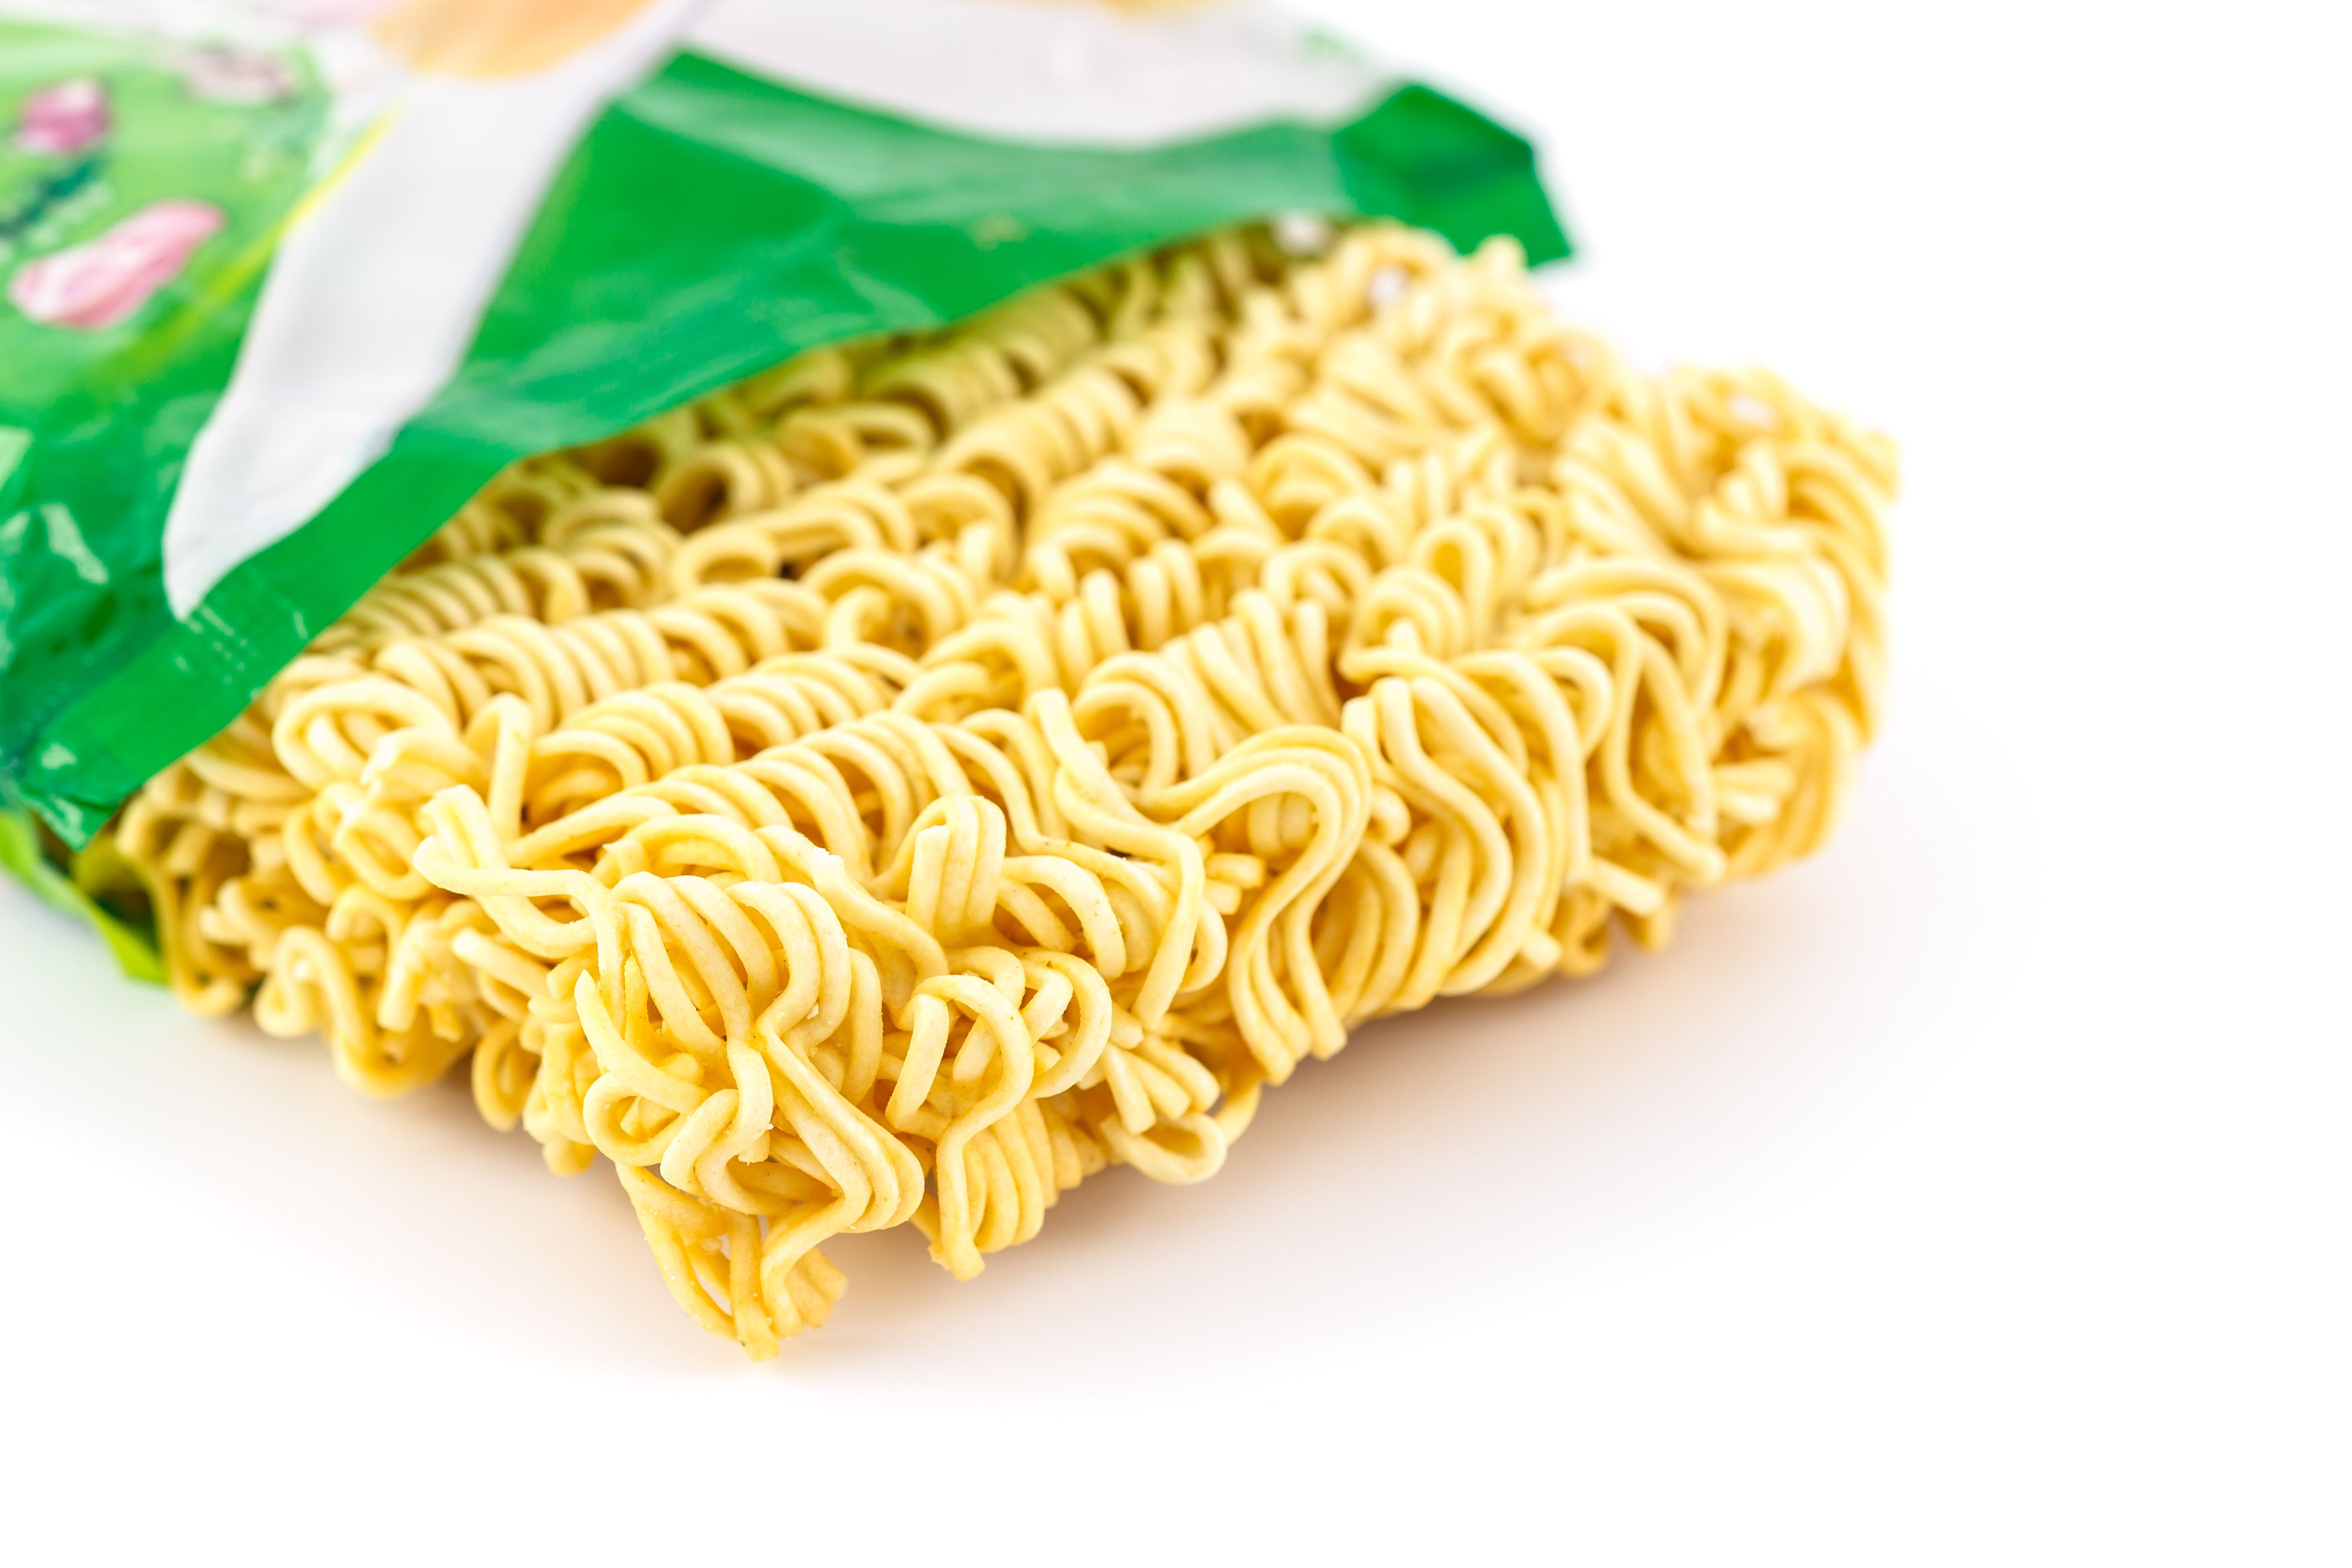 Why You Should Never Eat Top Ramen Why Instant Ramen Is Bad